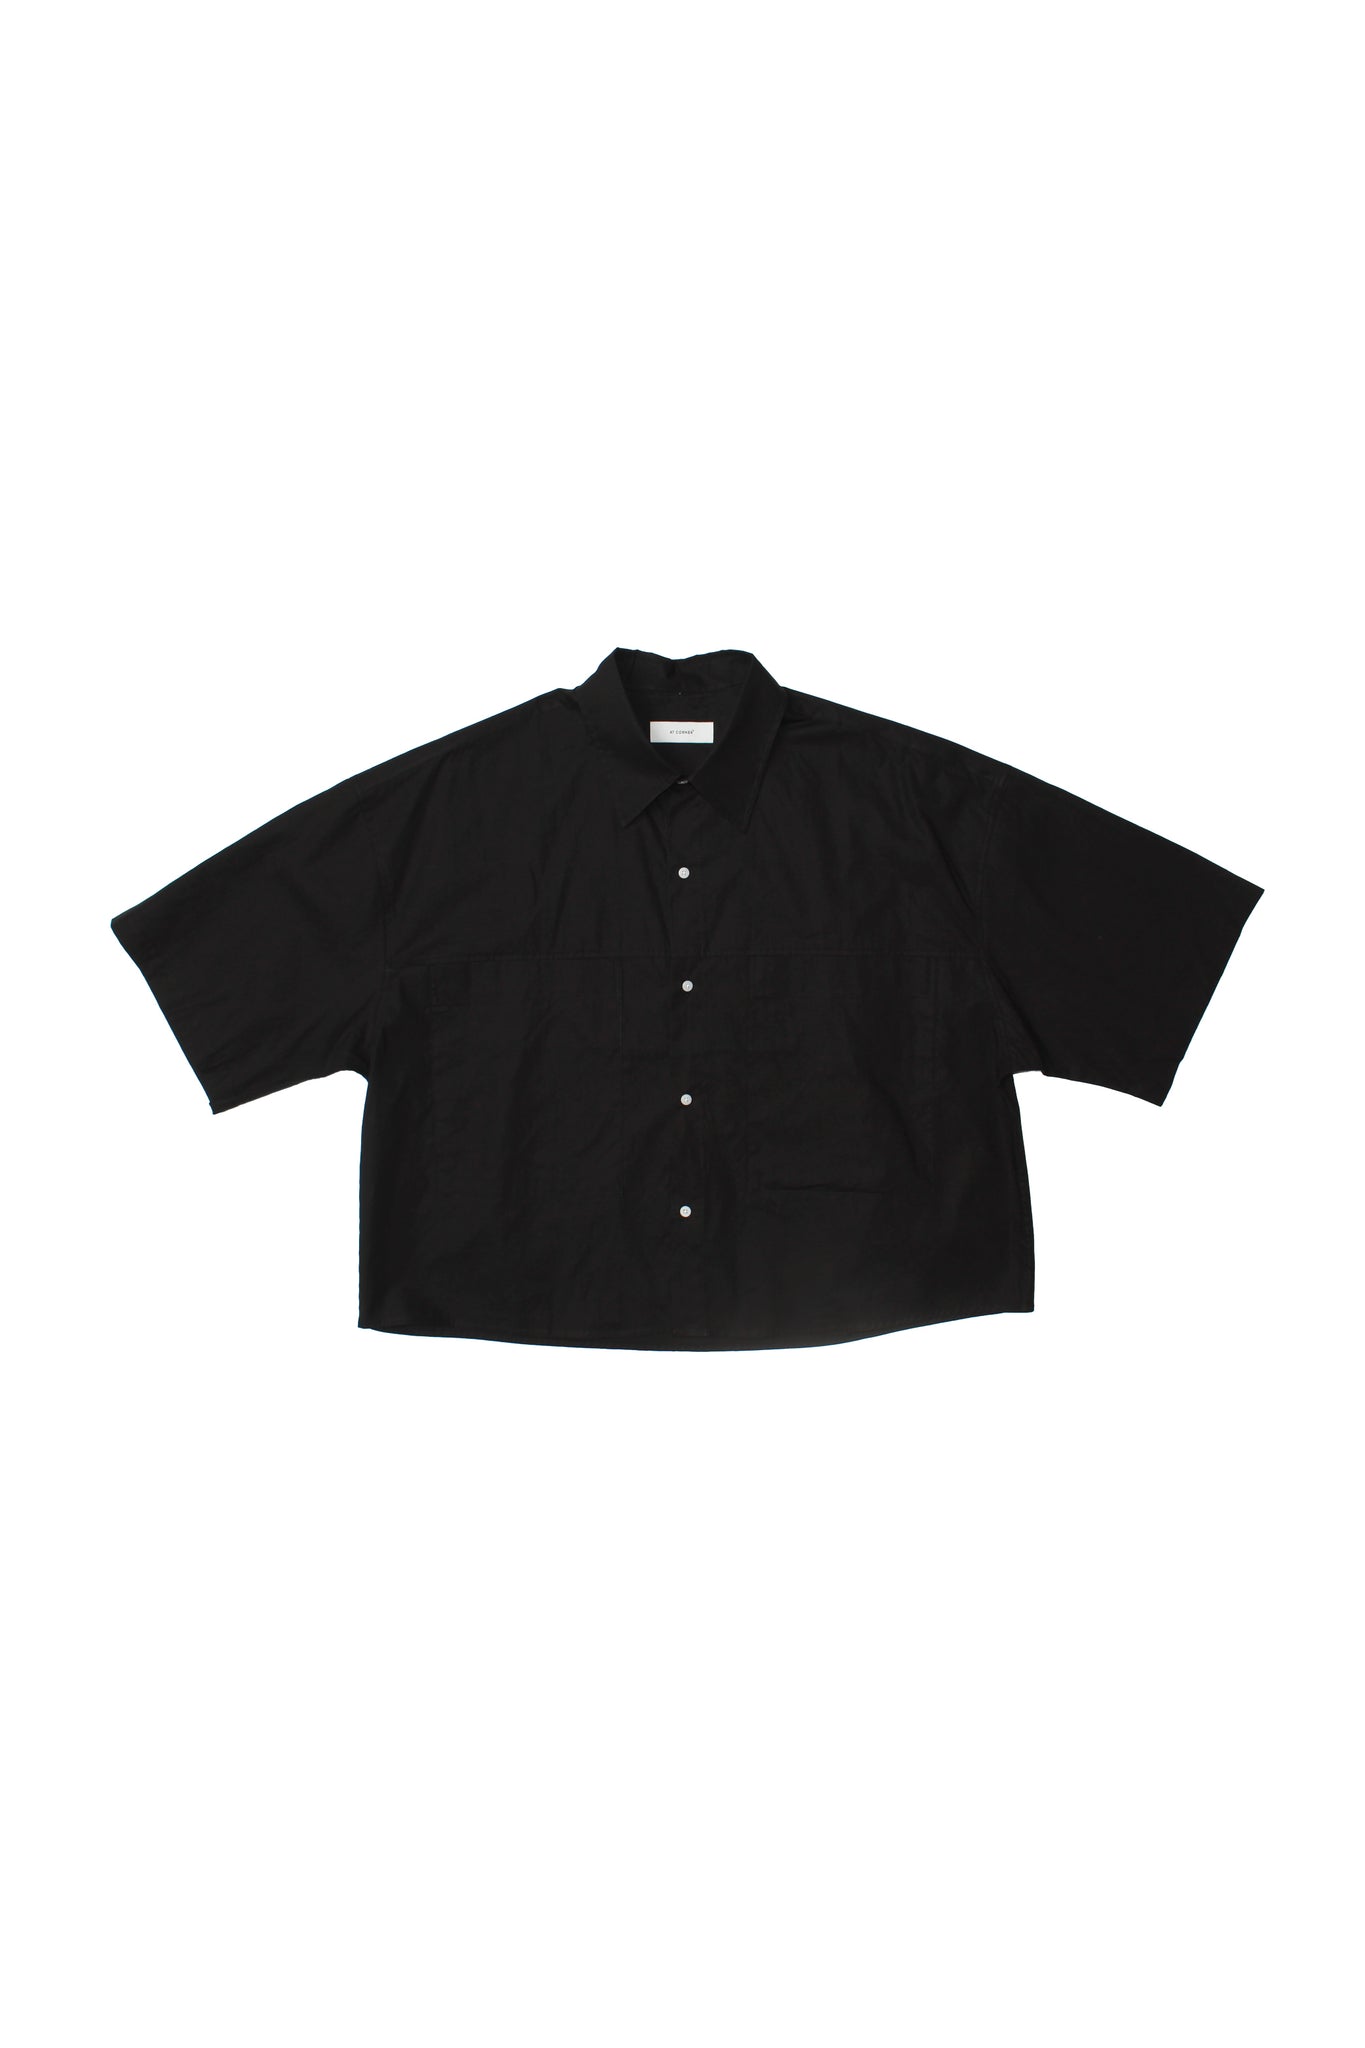 Oversized Crop Shirts in Black